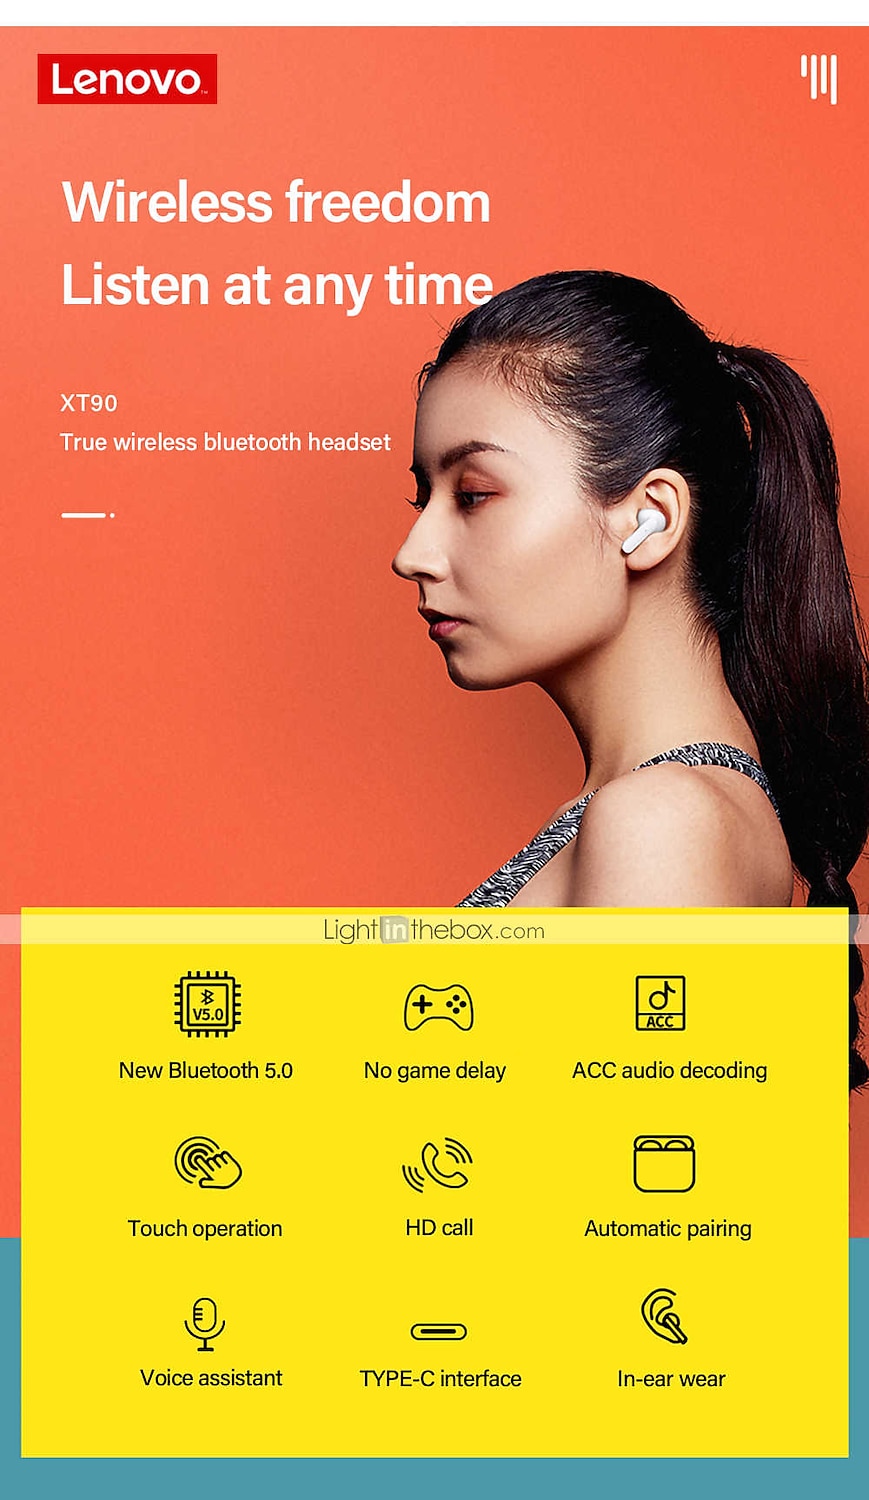 Ityrpy1603717791960 Lenovo &Lt;H1&Gt;Lenovo Xt90 Headphones - White&Lt;/H1&Gt; Https://Www.youtube.com/Watch?V=Gid67Ssw6Nk Bt 5.0 Headphones True Wireless Earbuds With Touch Control Hands-Free Stereo Sound Noise Canceling Ip54 Waterproof Dual Host Binaural Hd Call Type-C Interface Headsets With Mic For Gaming Sports Music Compatible With Ios Android Pc &Lt;A Href=&Quot;Https://Lablaab.com/?S=Earbuds&Amp;Post_Type=Product&Amp;Product_Cat=0&Quot;&Gt;More Products&Lt;/A&Gt; &Lt;B&Gt;We Also Provide International Wholesale And Retail Shipping To All Gcc Countries: Saudi Arabia, Qatar, Oman, Kuwait, Bahrain. &Lt;/B&Gt; &Lt;Pre&Gt;&Lt;/Pre&Gt; Lenovo Lenovo Xt90 Headphones - White